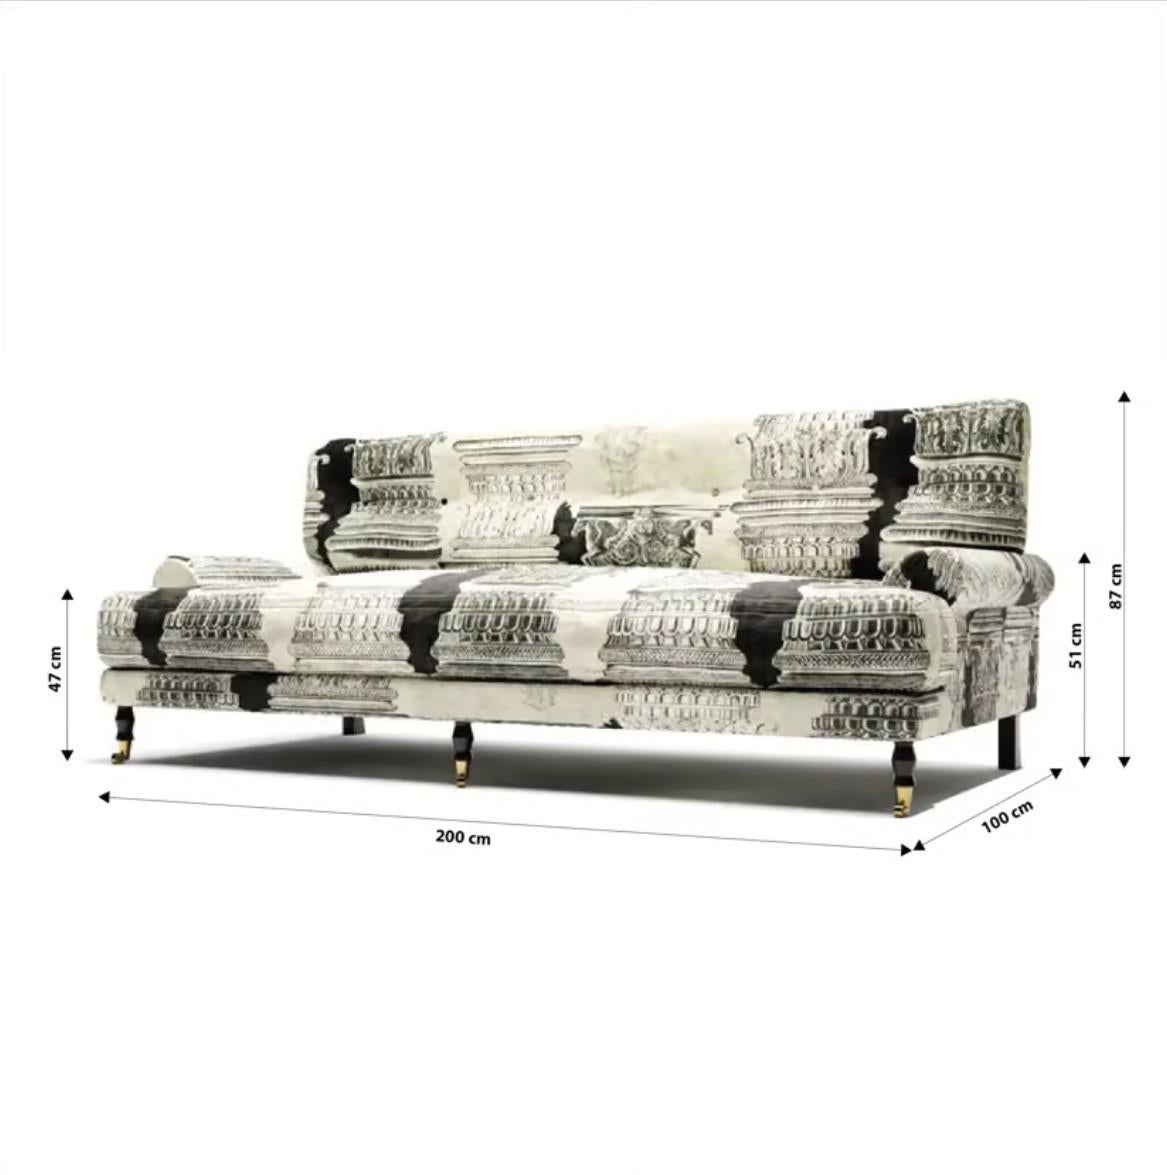 Lucania Centuries Sofa
Elevate your livingroom to new heights of grandeur and elegance with the captivating Lucania Centuries sofa. Its imposing presence, refined design, and infinite elegance make it a striking focal point in any space. What's